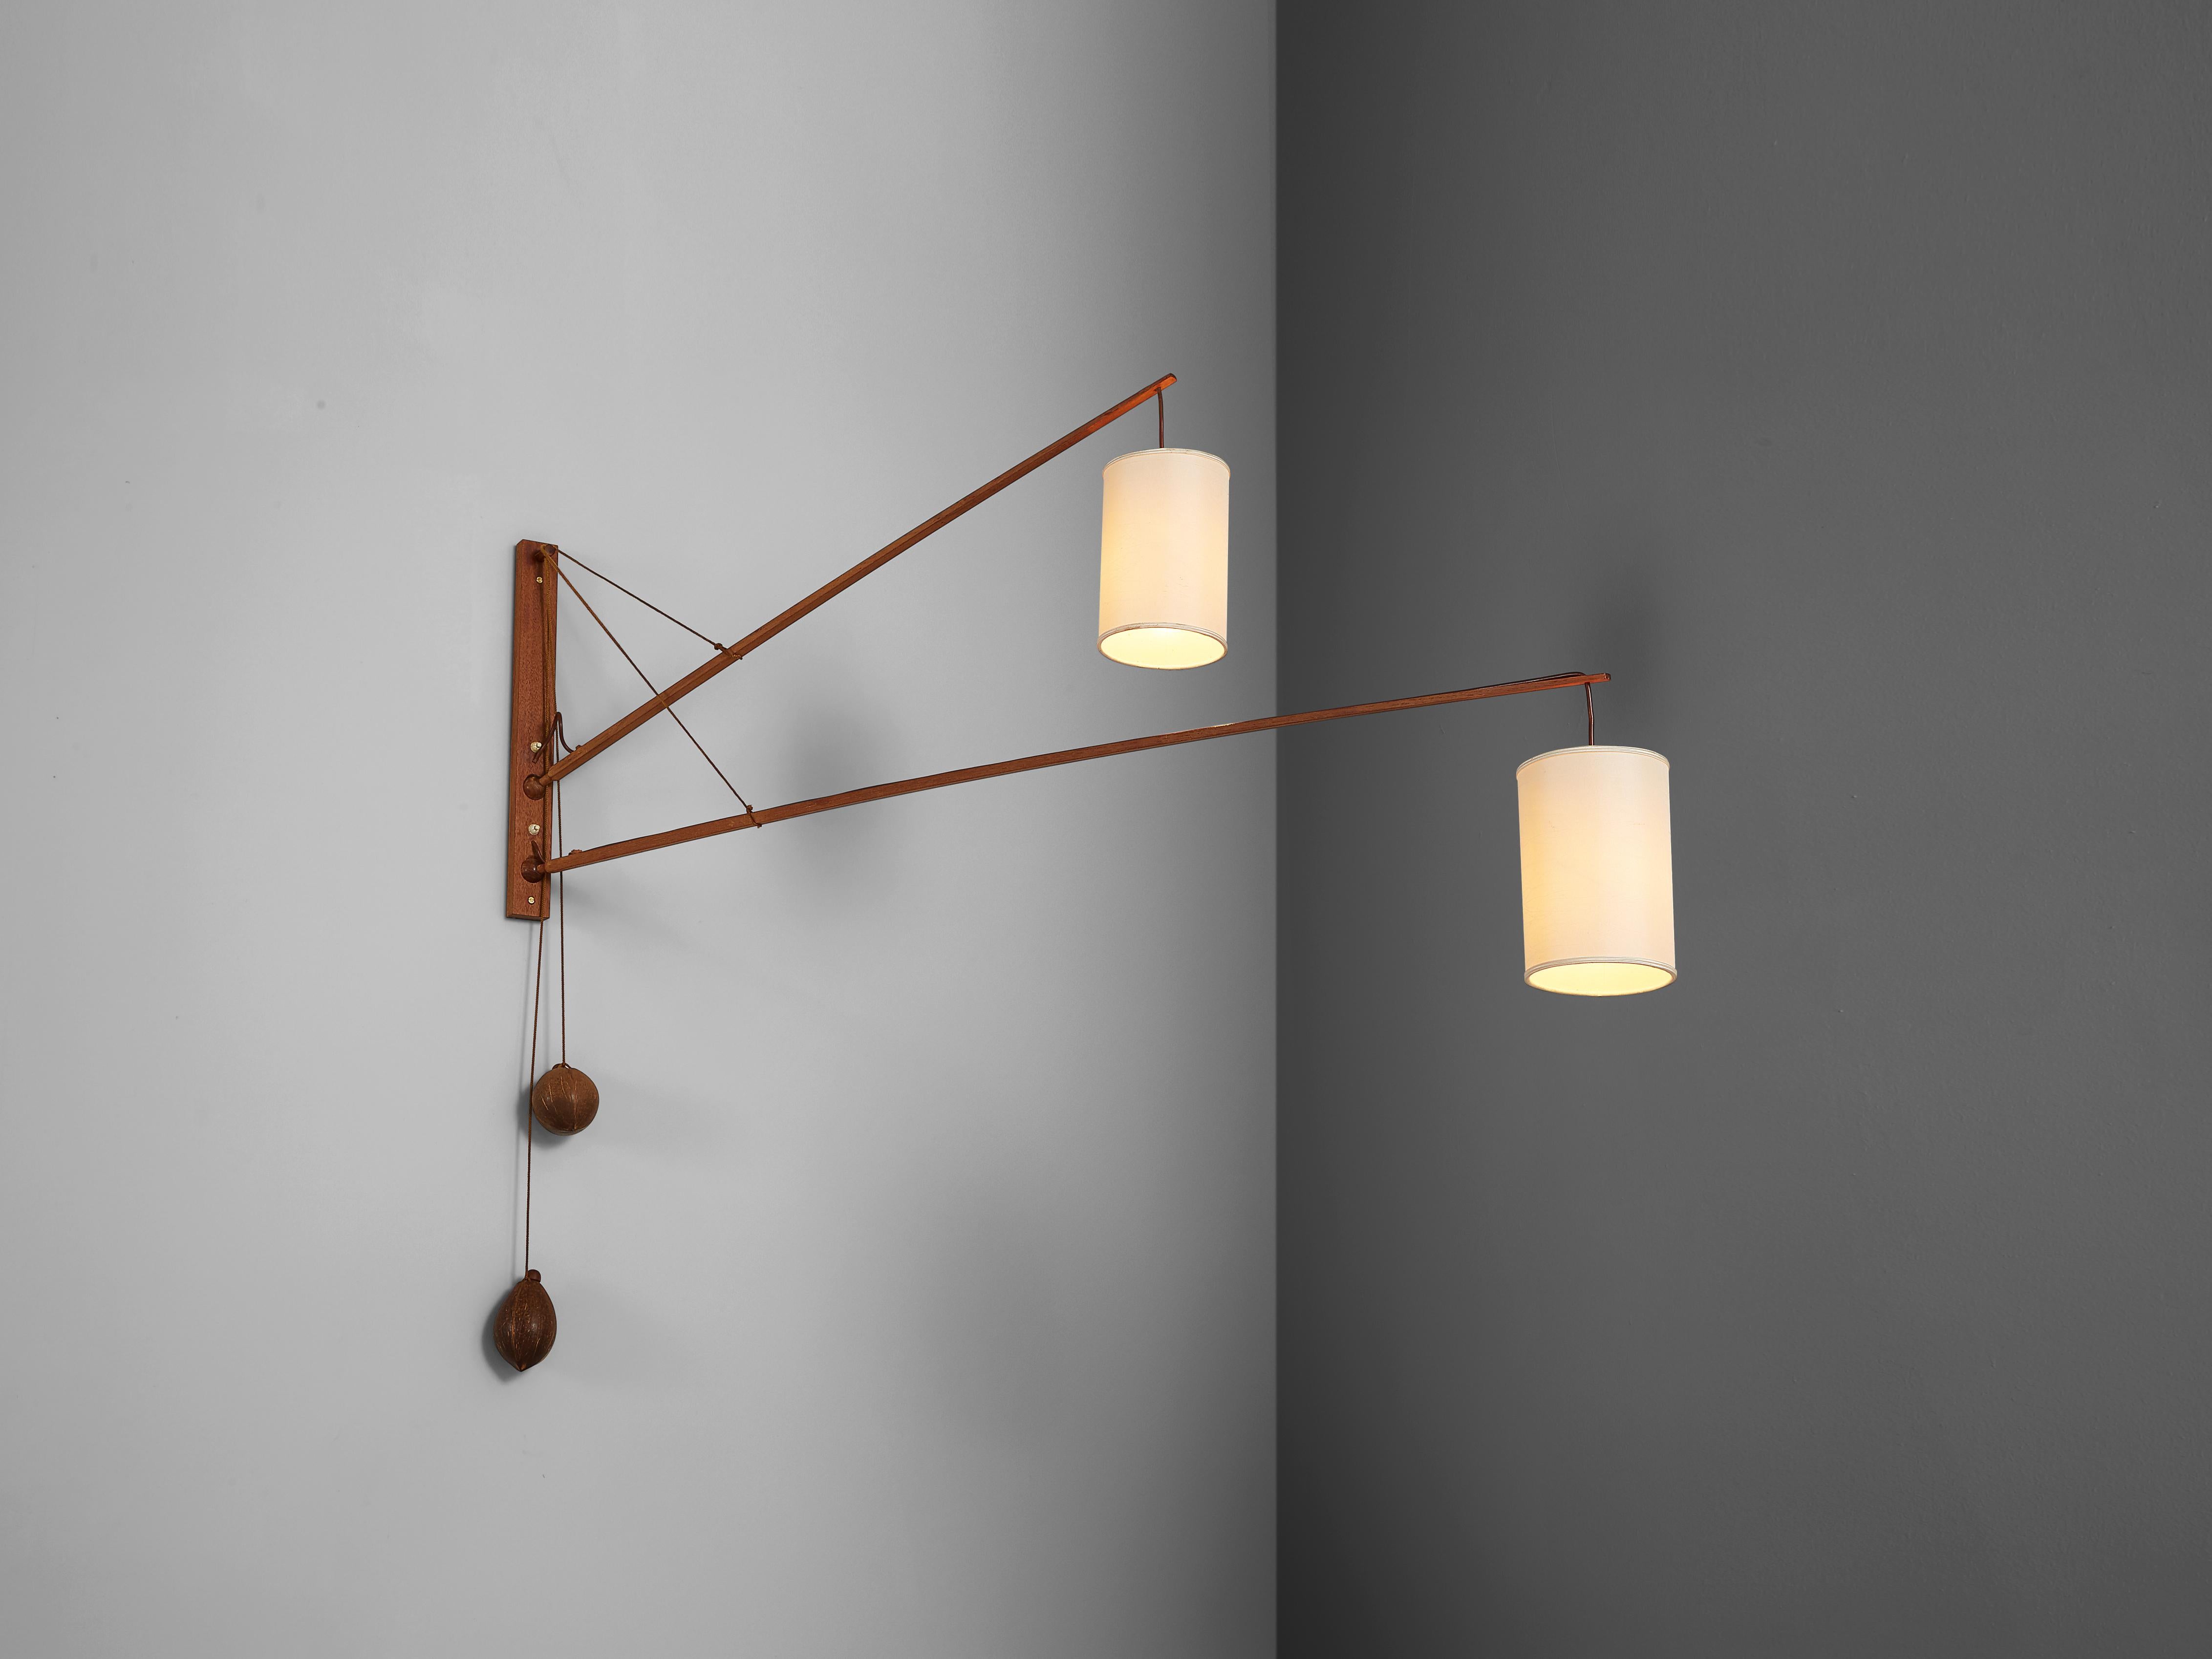 Rupprecht Skrip for Skrip Leuchten, wall lamp, teak, cord, parchment, Germany, 1958.

Refined German wall lamp with two adjustable arms designed by Rupprecht Skrip. Through a cord the two arms in teak are adjustable in height and position. Two